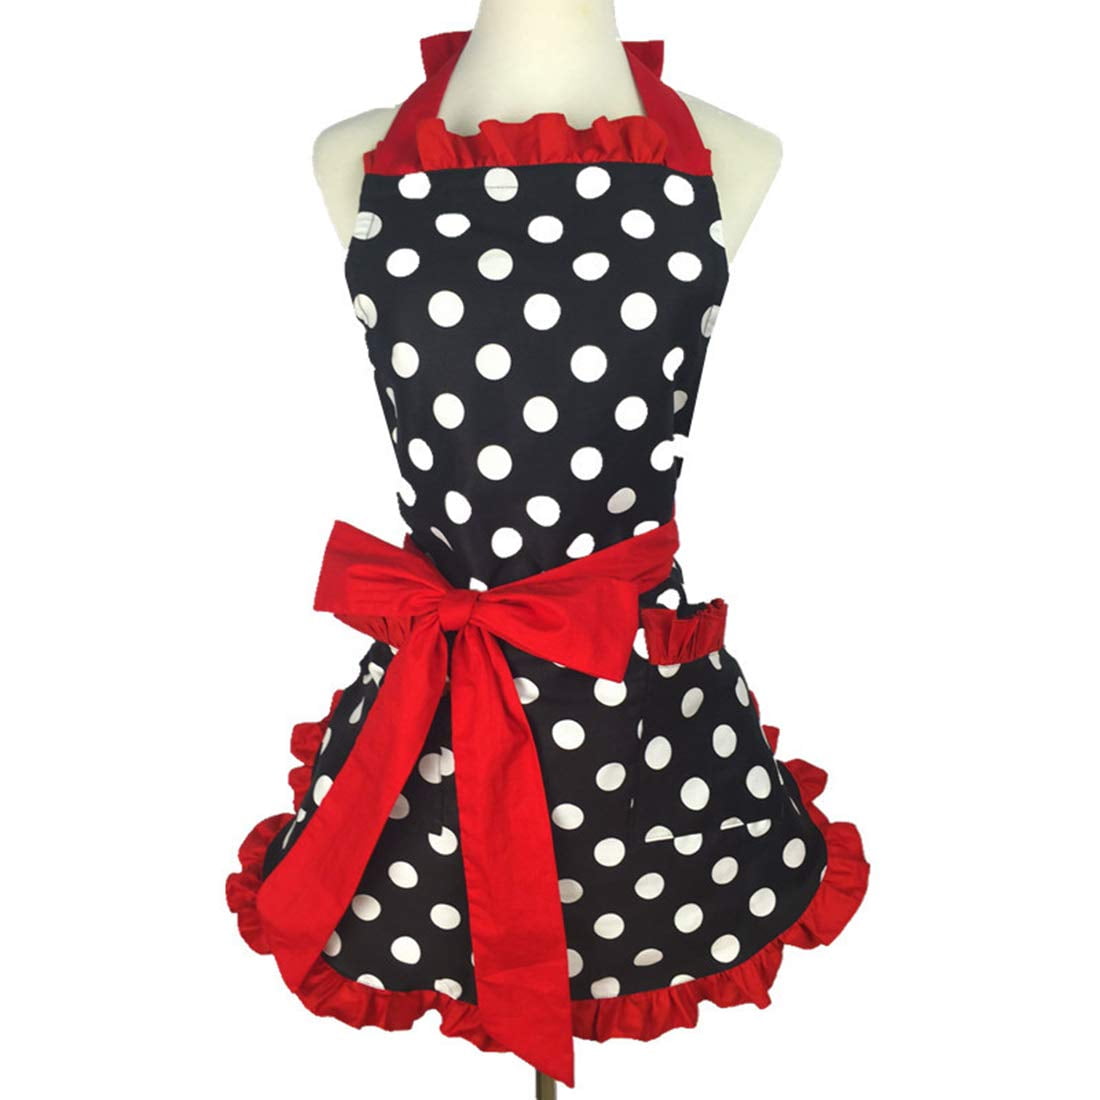 Hyzrz Cute Apron Retro Black Polka Dot Retro Ruffle Side Vintage Cooking Aprons With Pockets For 